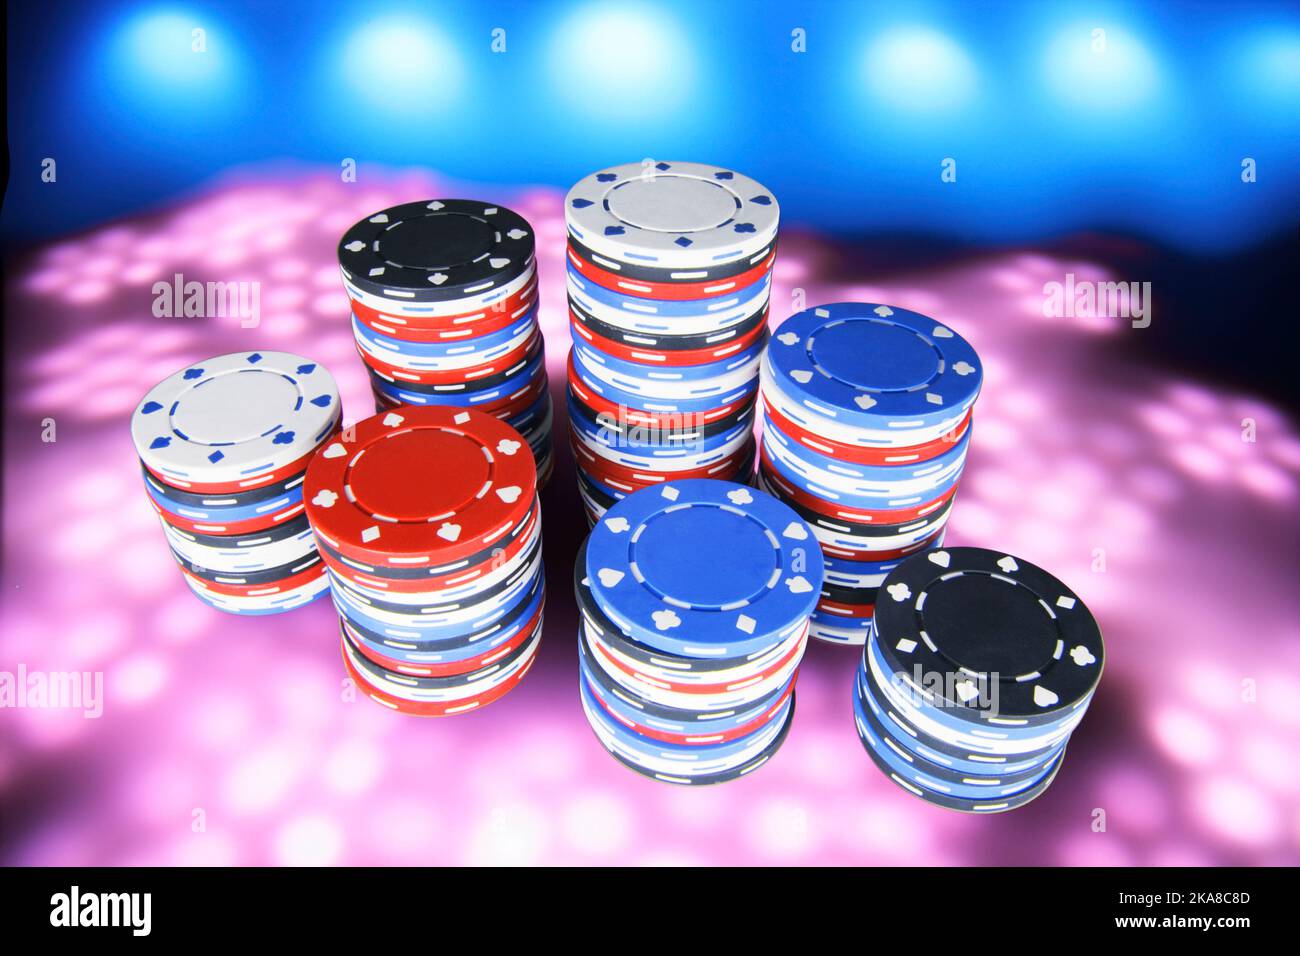 Stacks of Gaming Chips Stock Photo